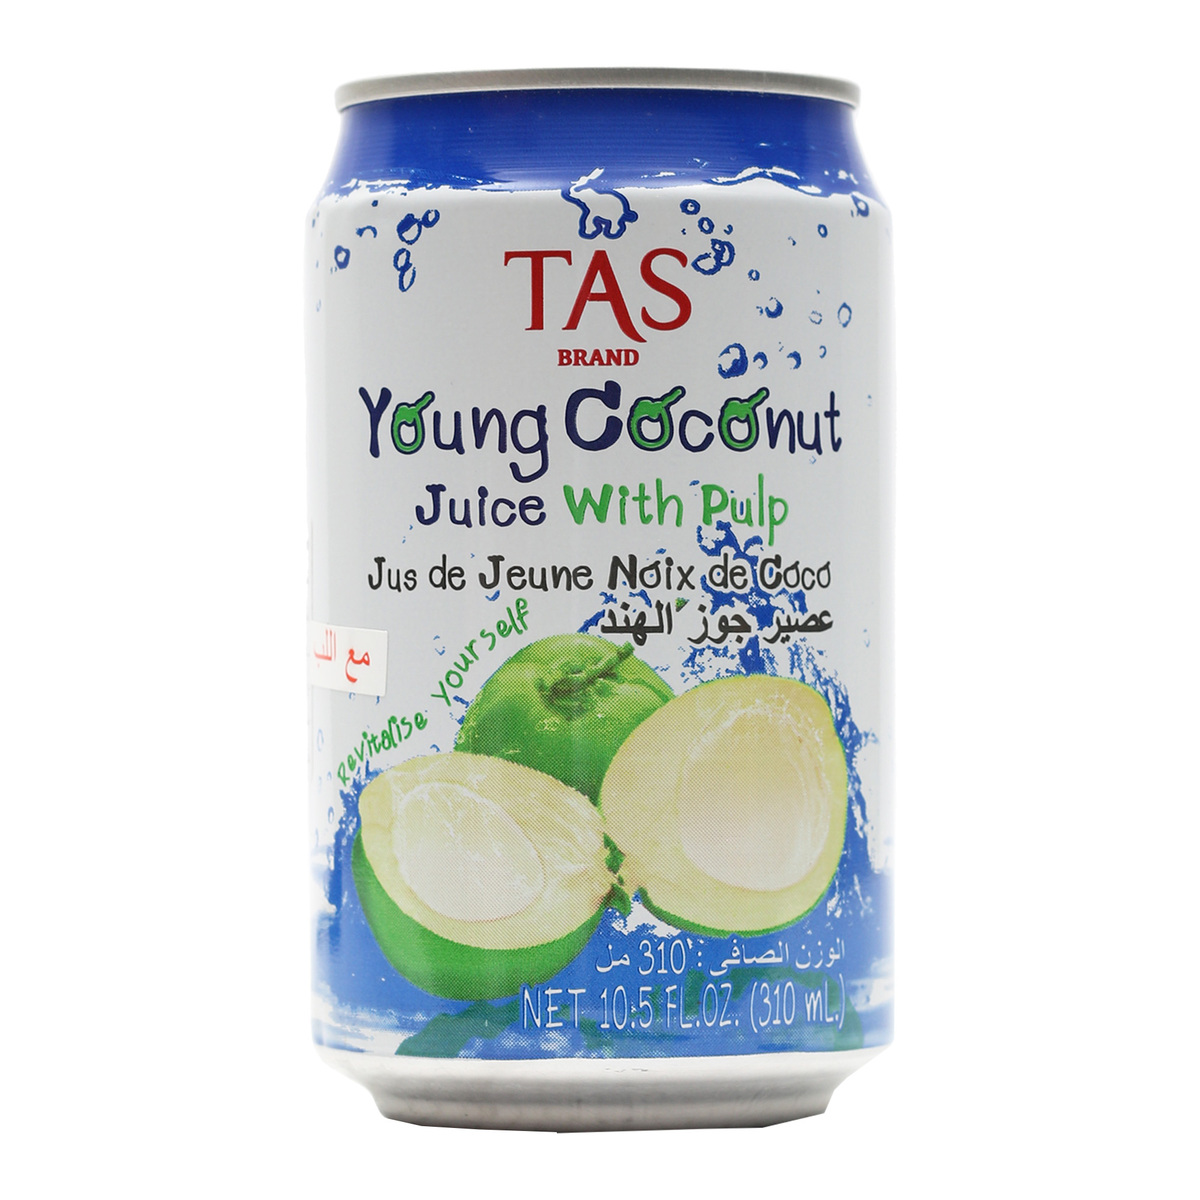 Tas Young Coconut Juice With Pulp 310ml